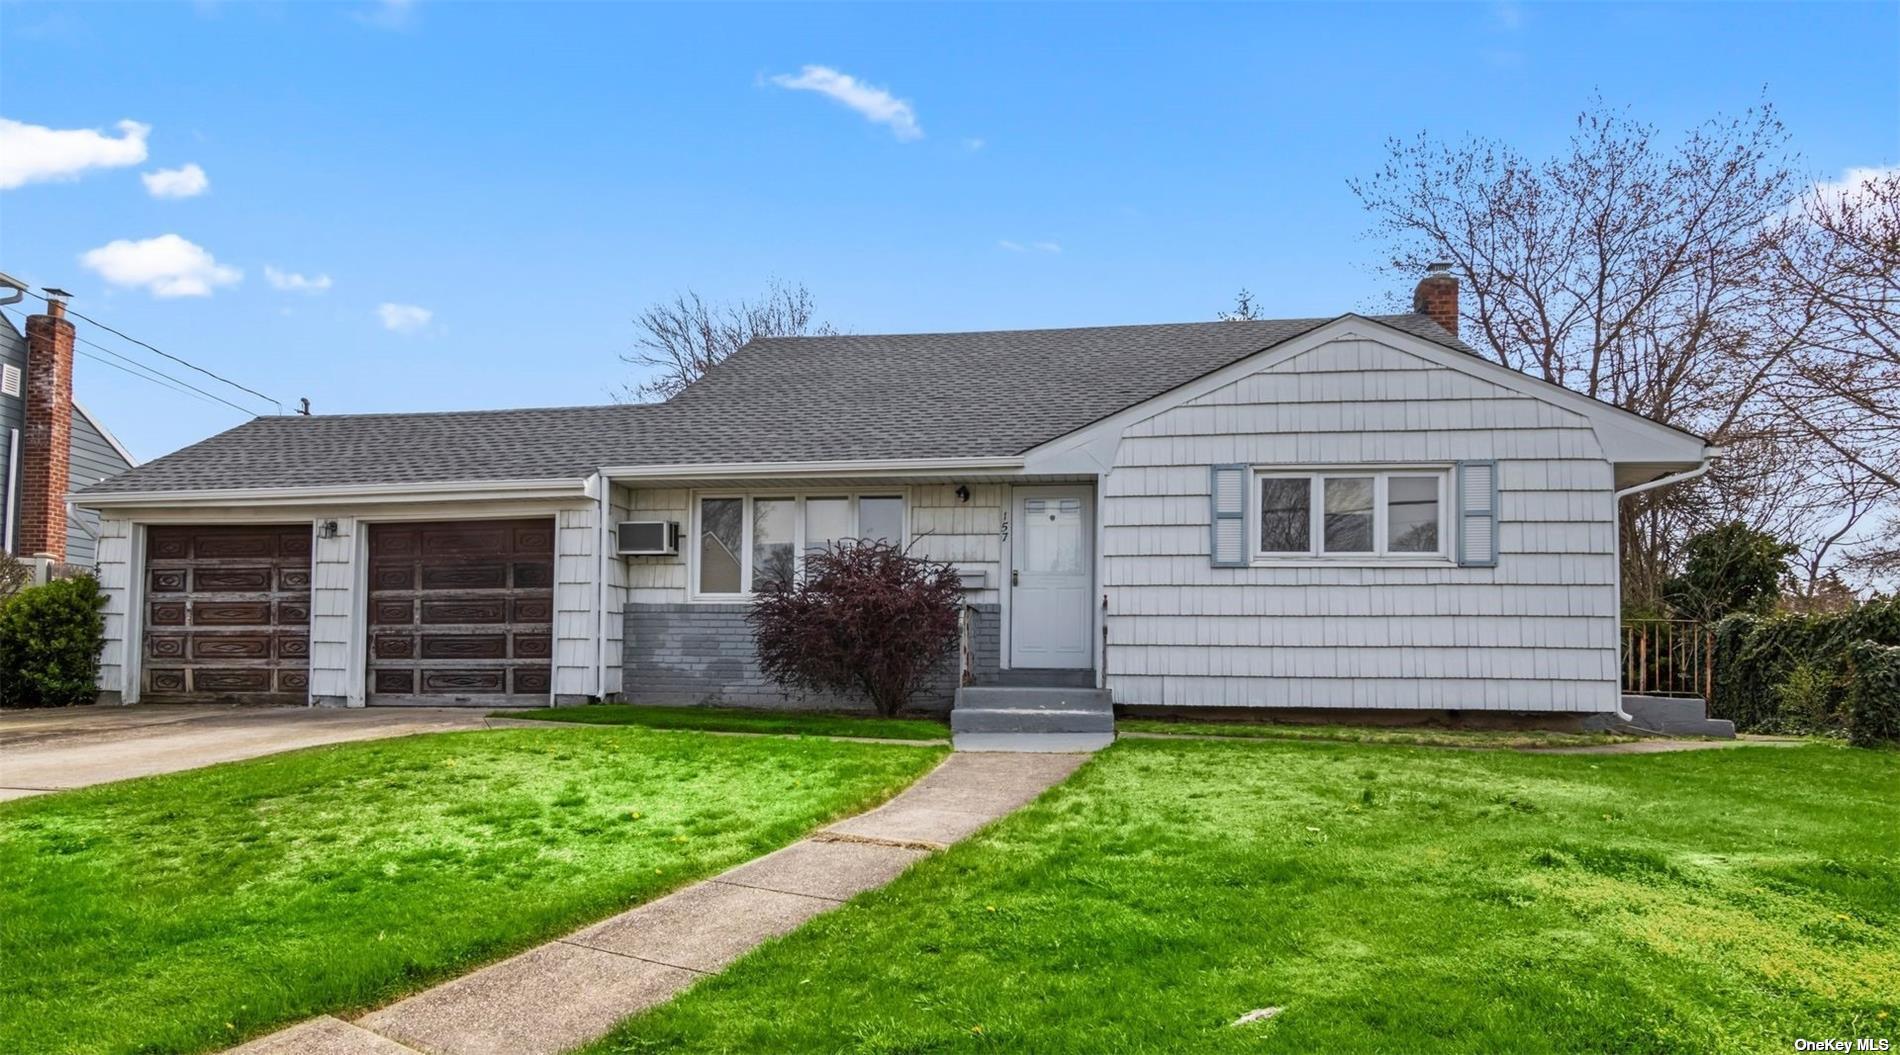 Soooo Much Potential In This Spacious Split Level Home On A Beautiful Street In The Sought After "Sunset City" Section Of North Babylon!